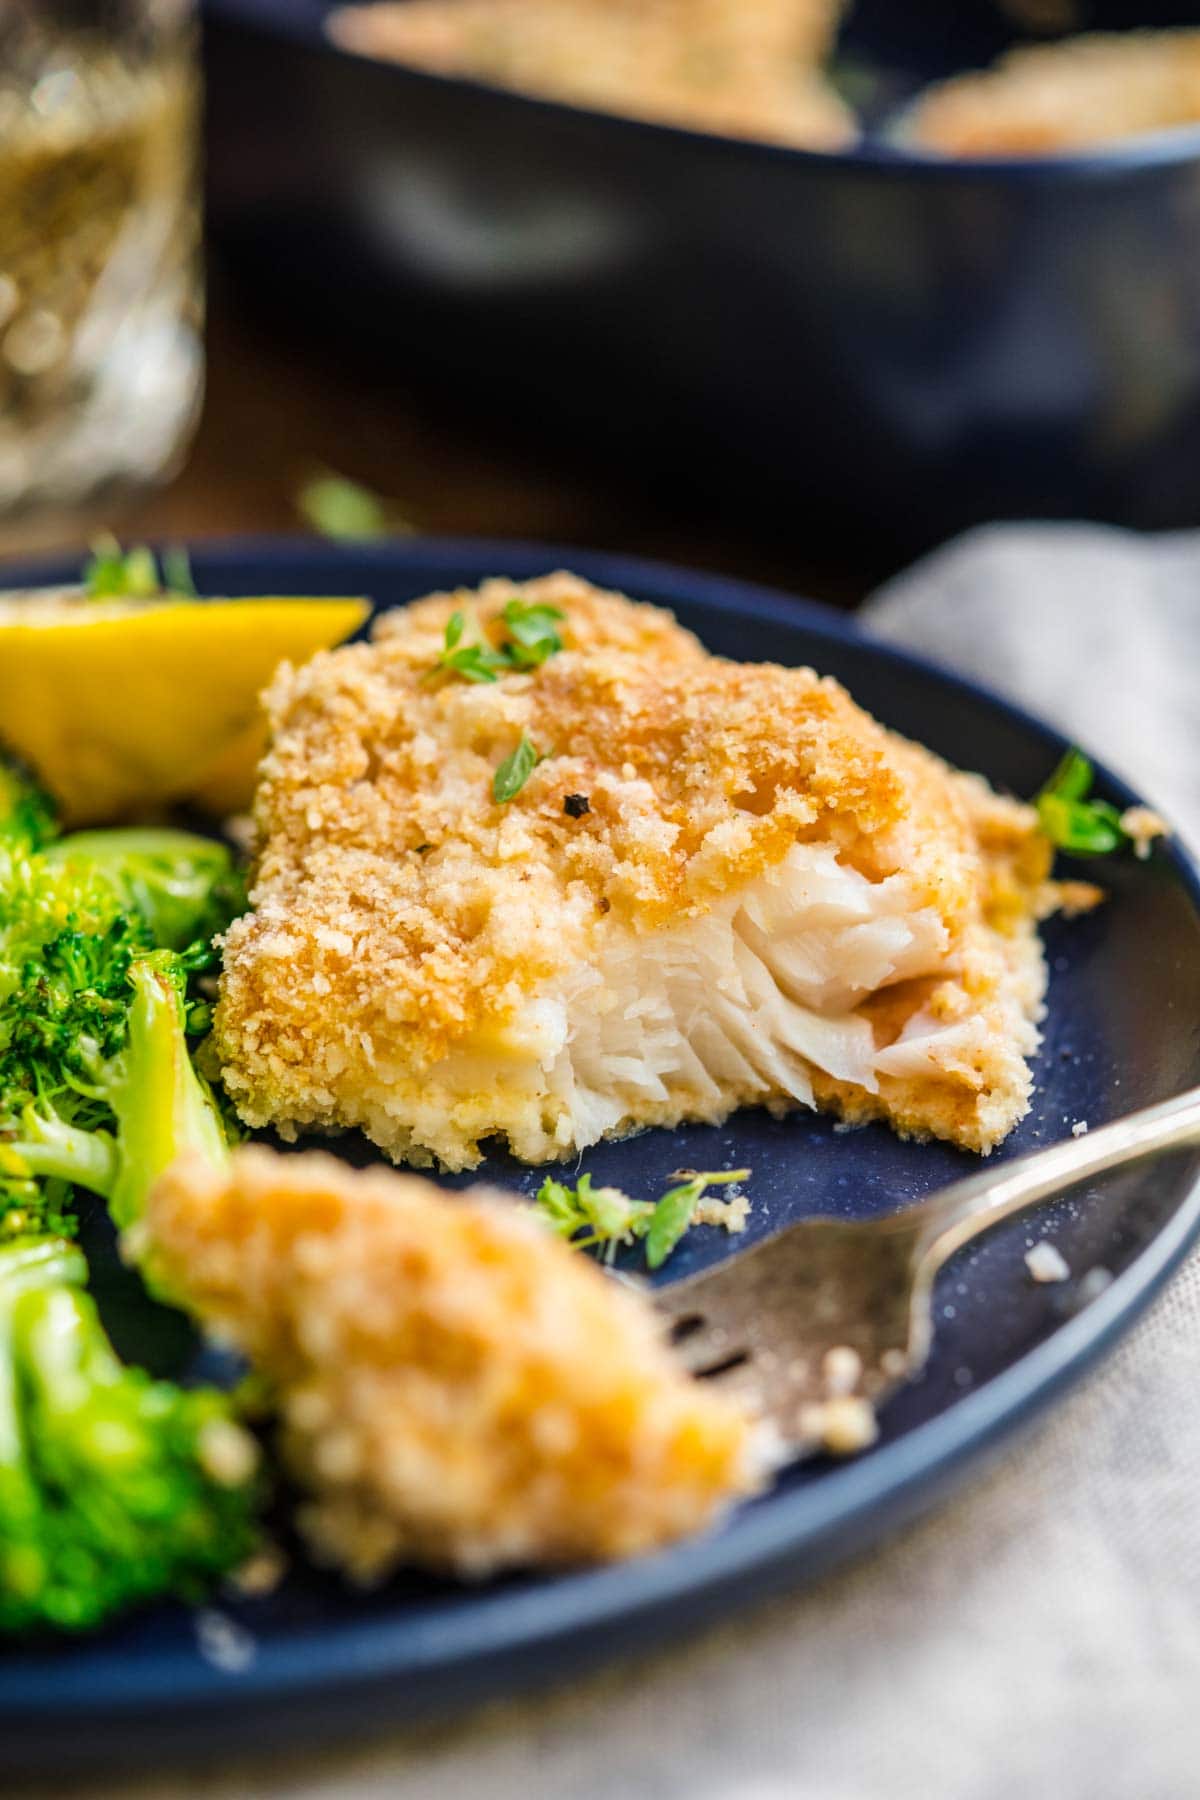 Baked Cod with lemon wedge garnish on plate with broccoli and fork